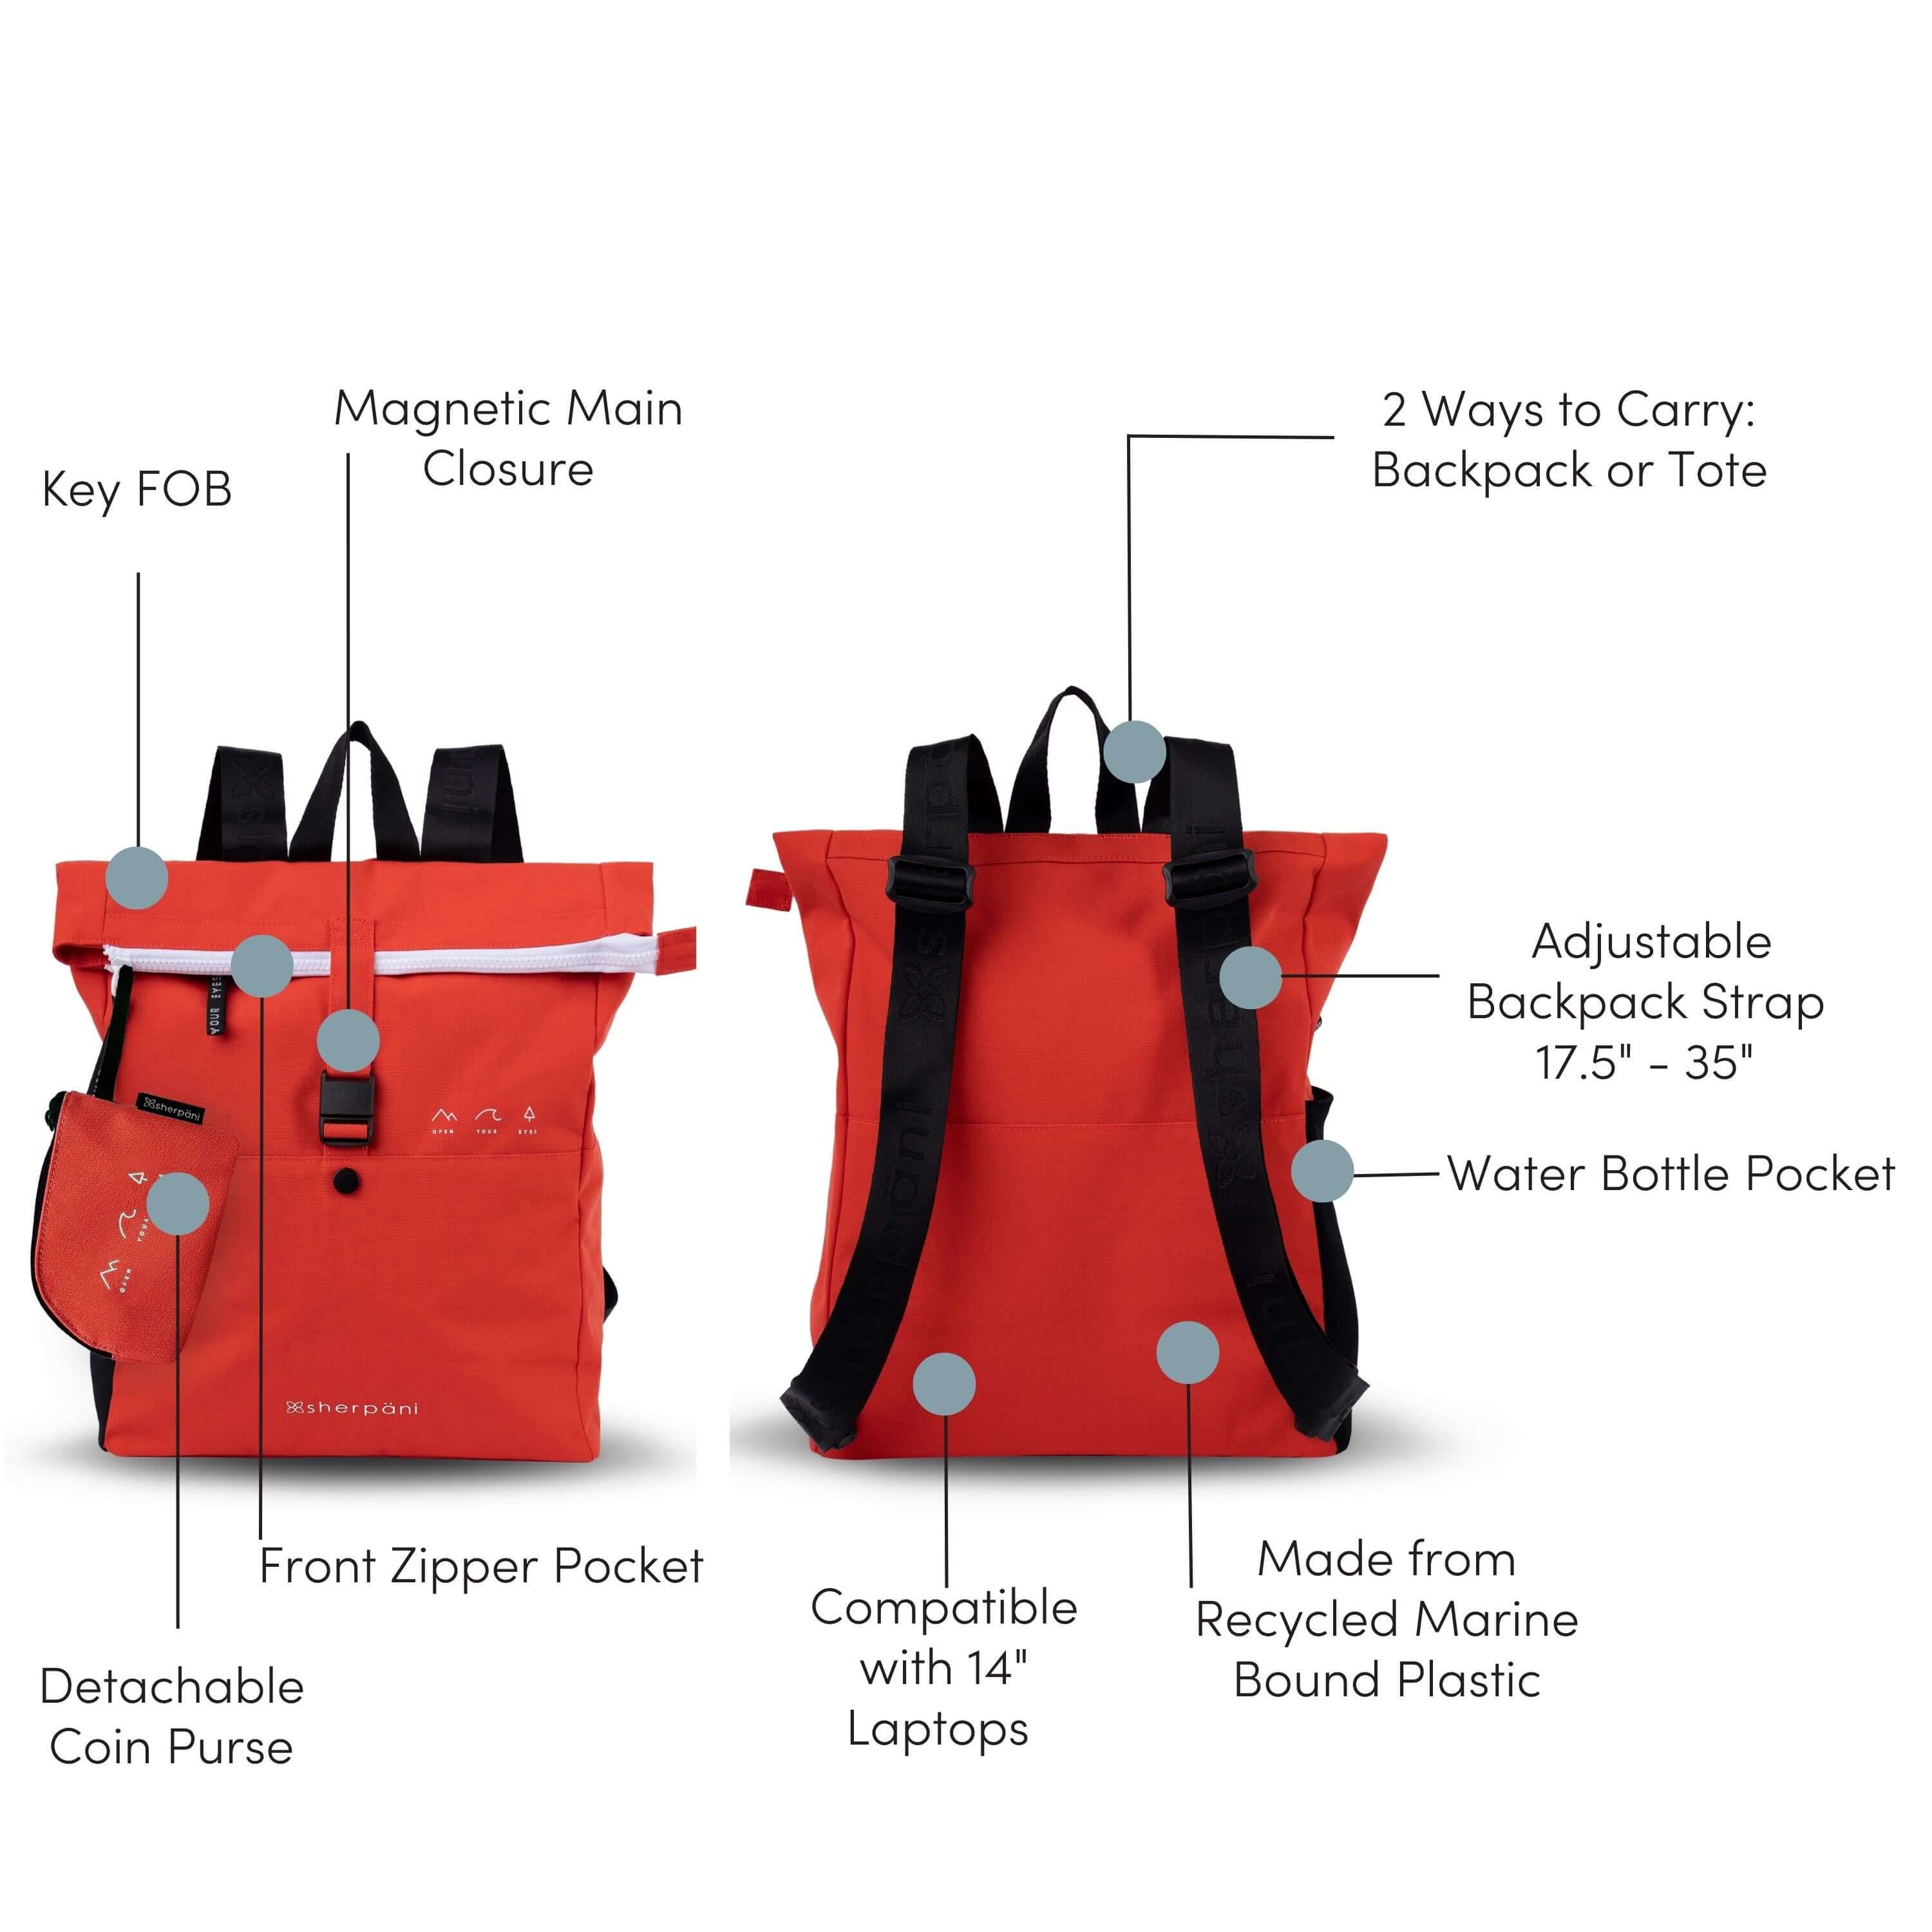 Graphic showcasing the features of Sherpani backpack, the Miyako. There is a front and back view of the bag. Gray circles highlight the following features: Key FOB, Magnetic Main Closure, 2 Ways to Carry: Backpack or Tote, Adjustable Backpack Strap 17.5&quot;-35&quot;, Water Bottle Pocket, Made from Recycled Marine Bound Plastic, Compatible with 14&quot; Laptops, Front Zipper Pocket, Detachable Coin Purse.